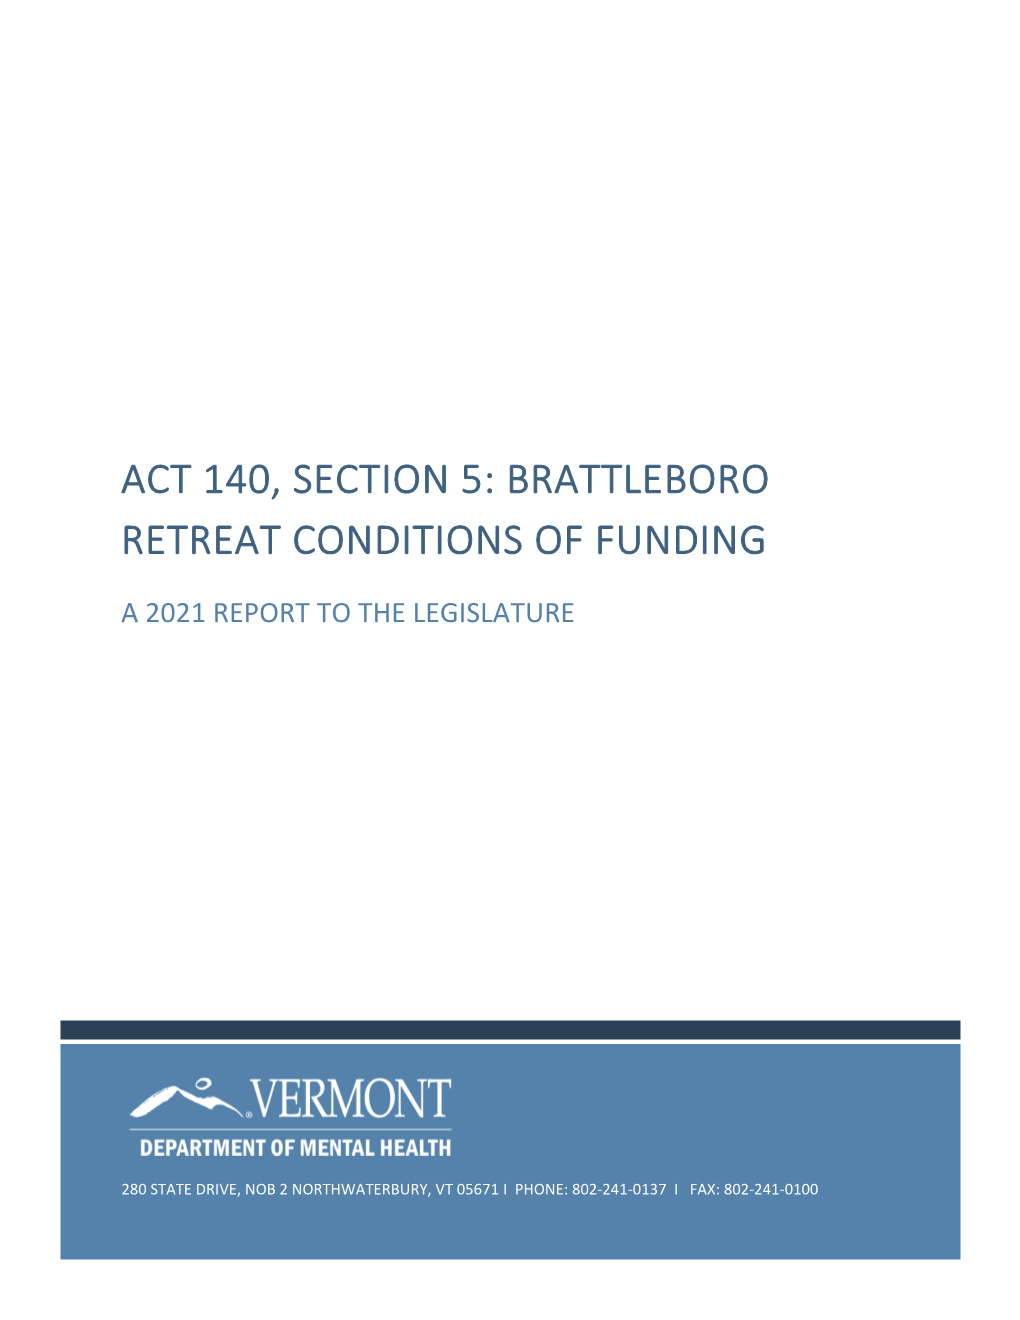 Act 140, Section 5: Brattleboro Retreat Conditions of Funding a 2021